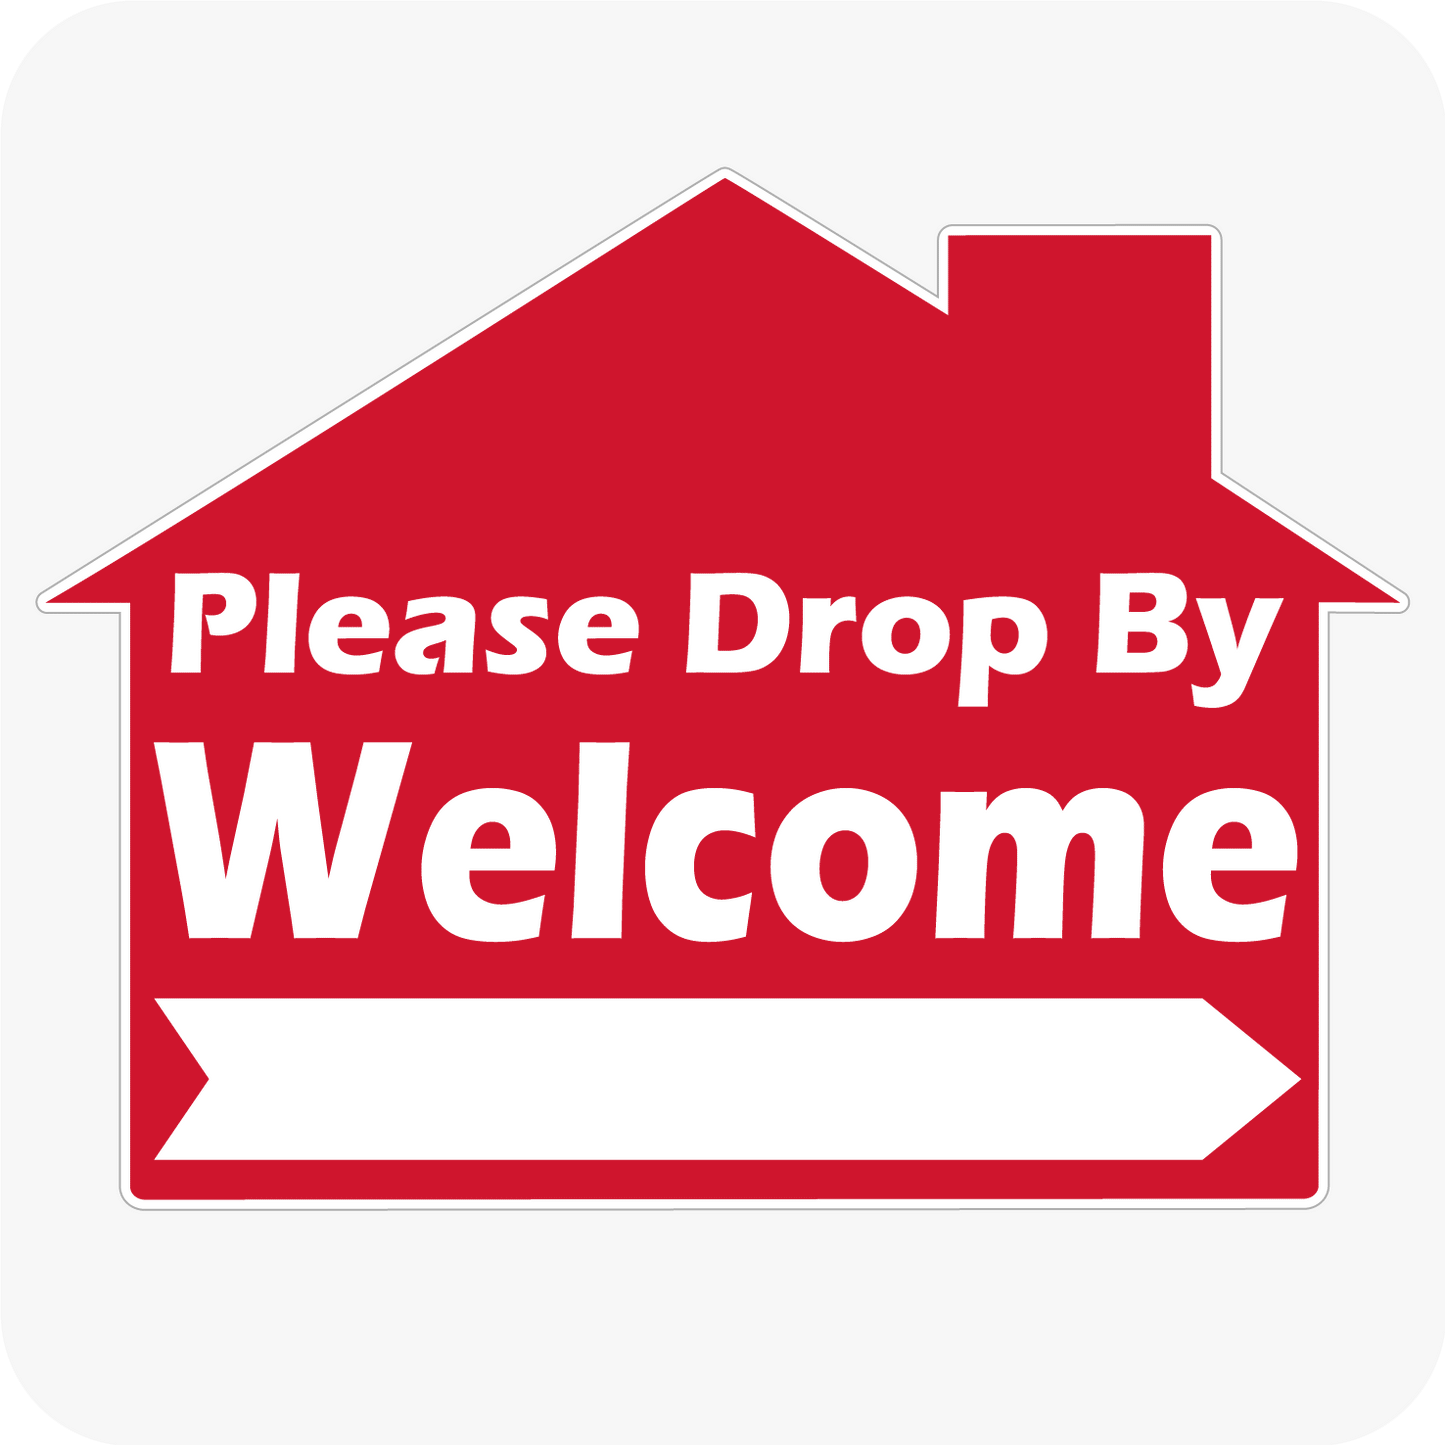 Welcome Please Drop By - House Shaped Sign 18 x 24 - Red